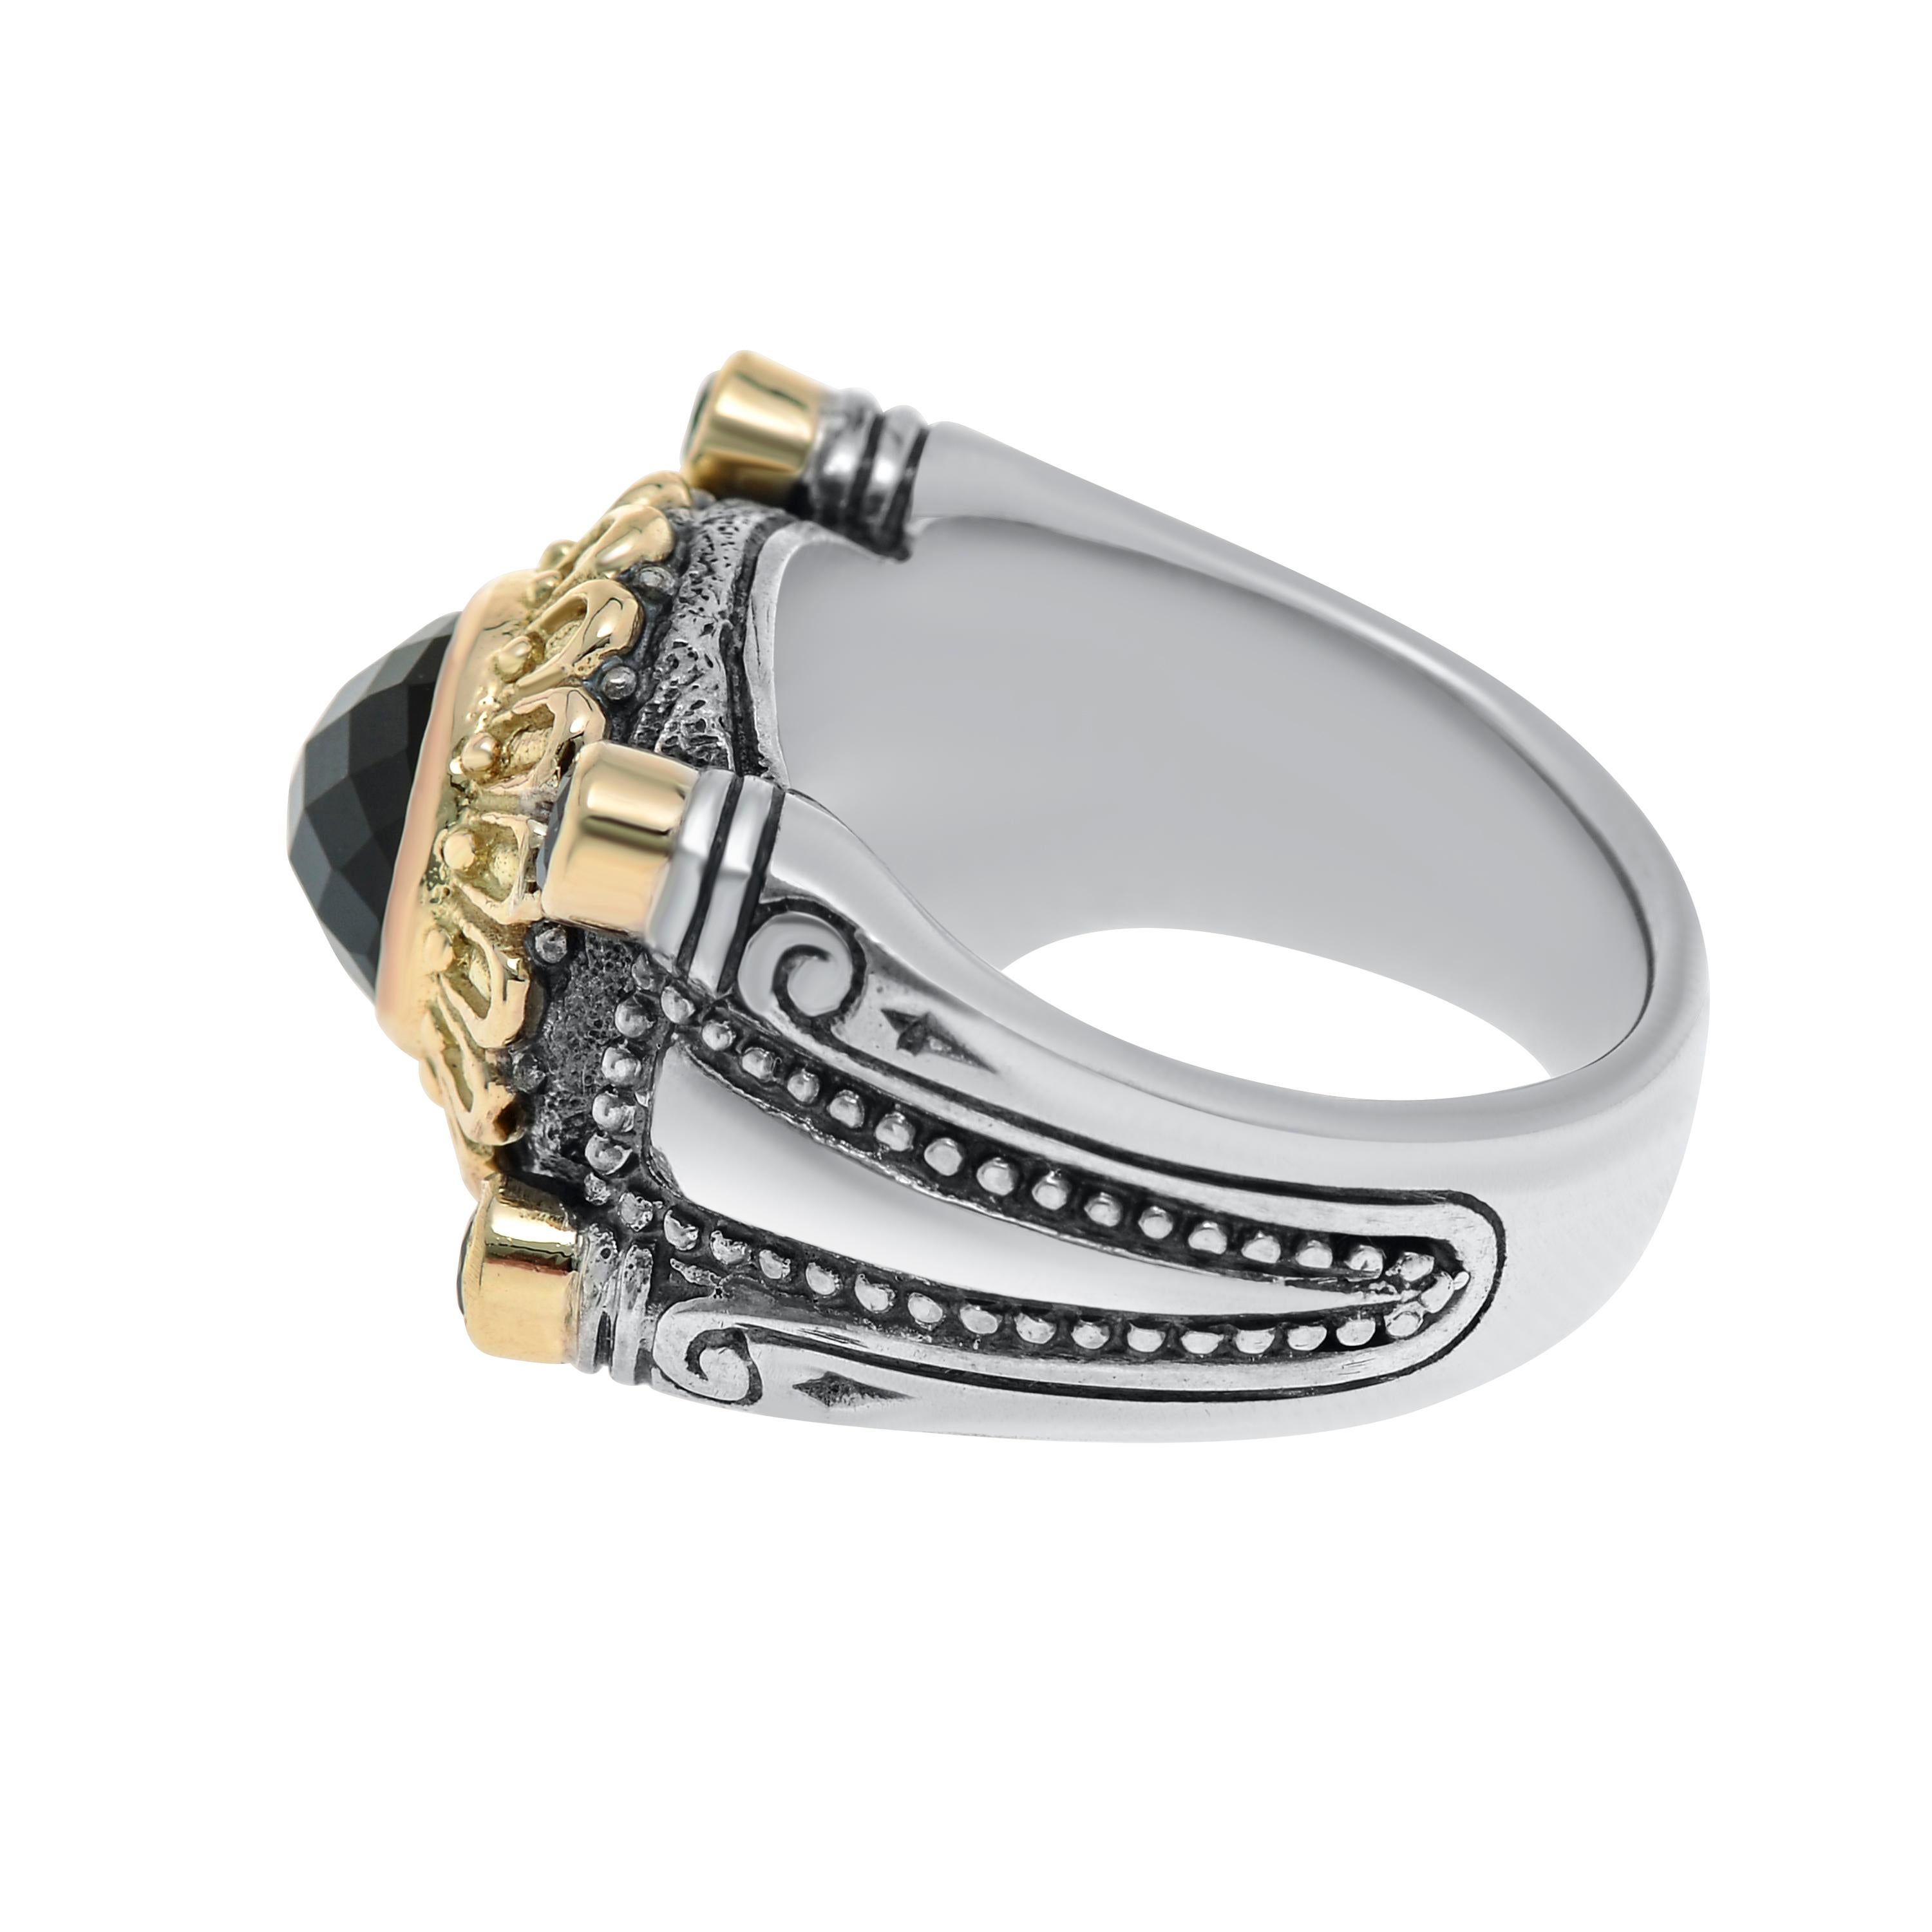 Contemporary Konstantino Sterling Silver, 18K Gold and Onyx Ring sz 7.25 For Sale